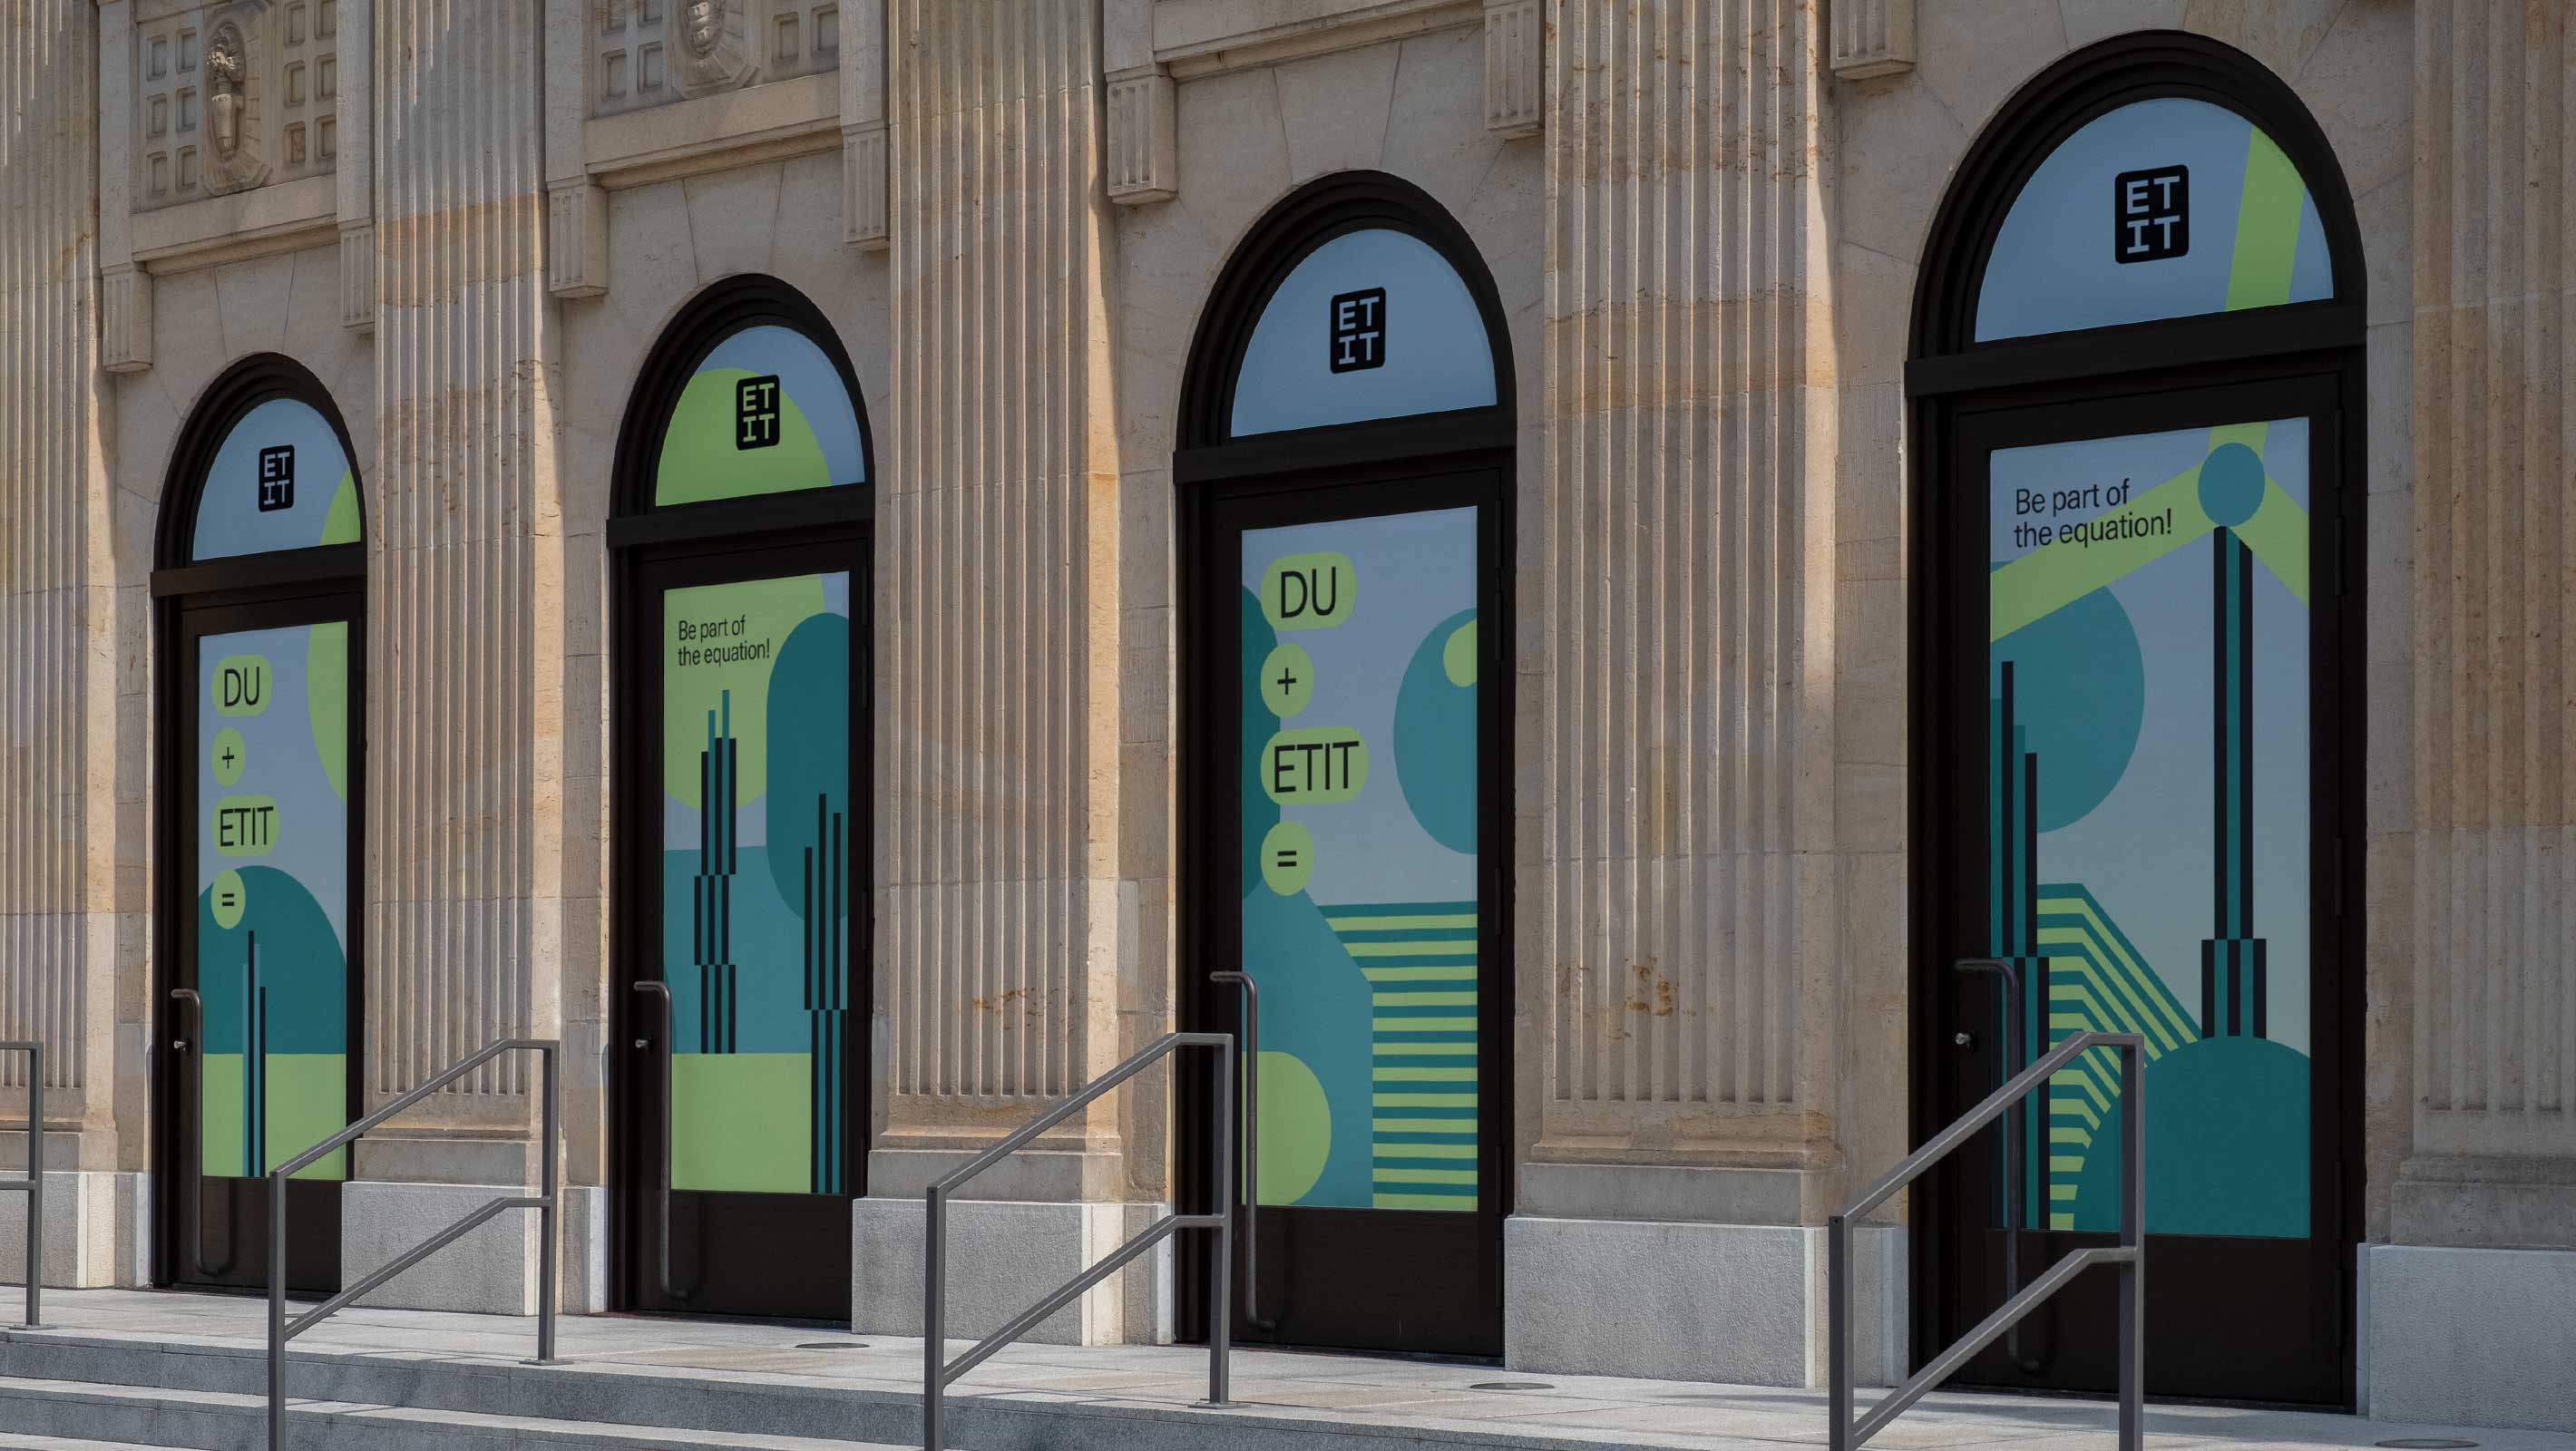 A photo of an entrance of a university building with window signage of illustrations and slogans of the ETIT TU Vienna campaign concept in bright blue and neon green-yellow colors.